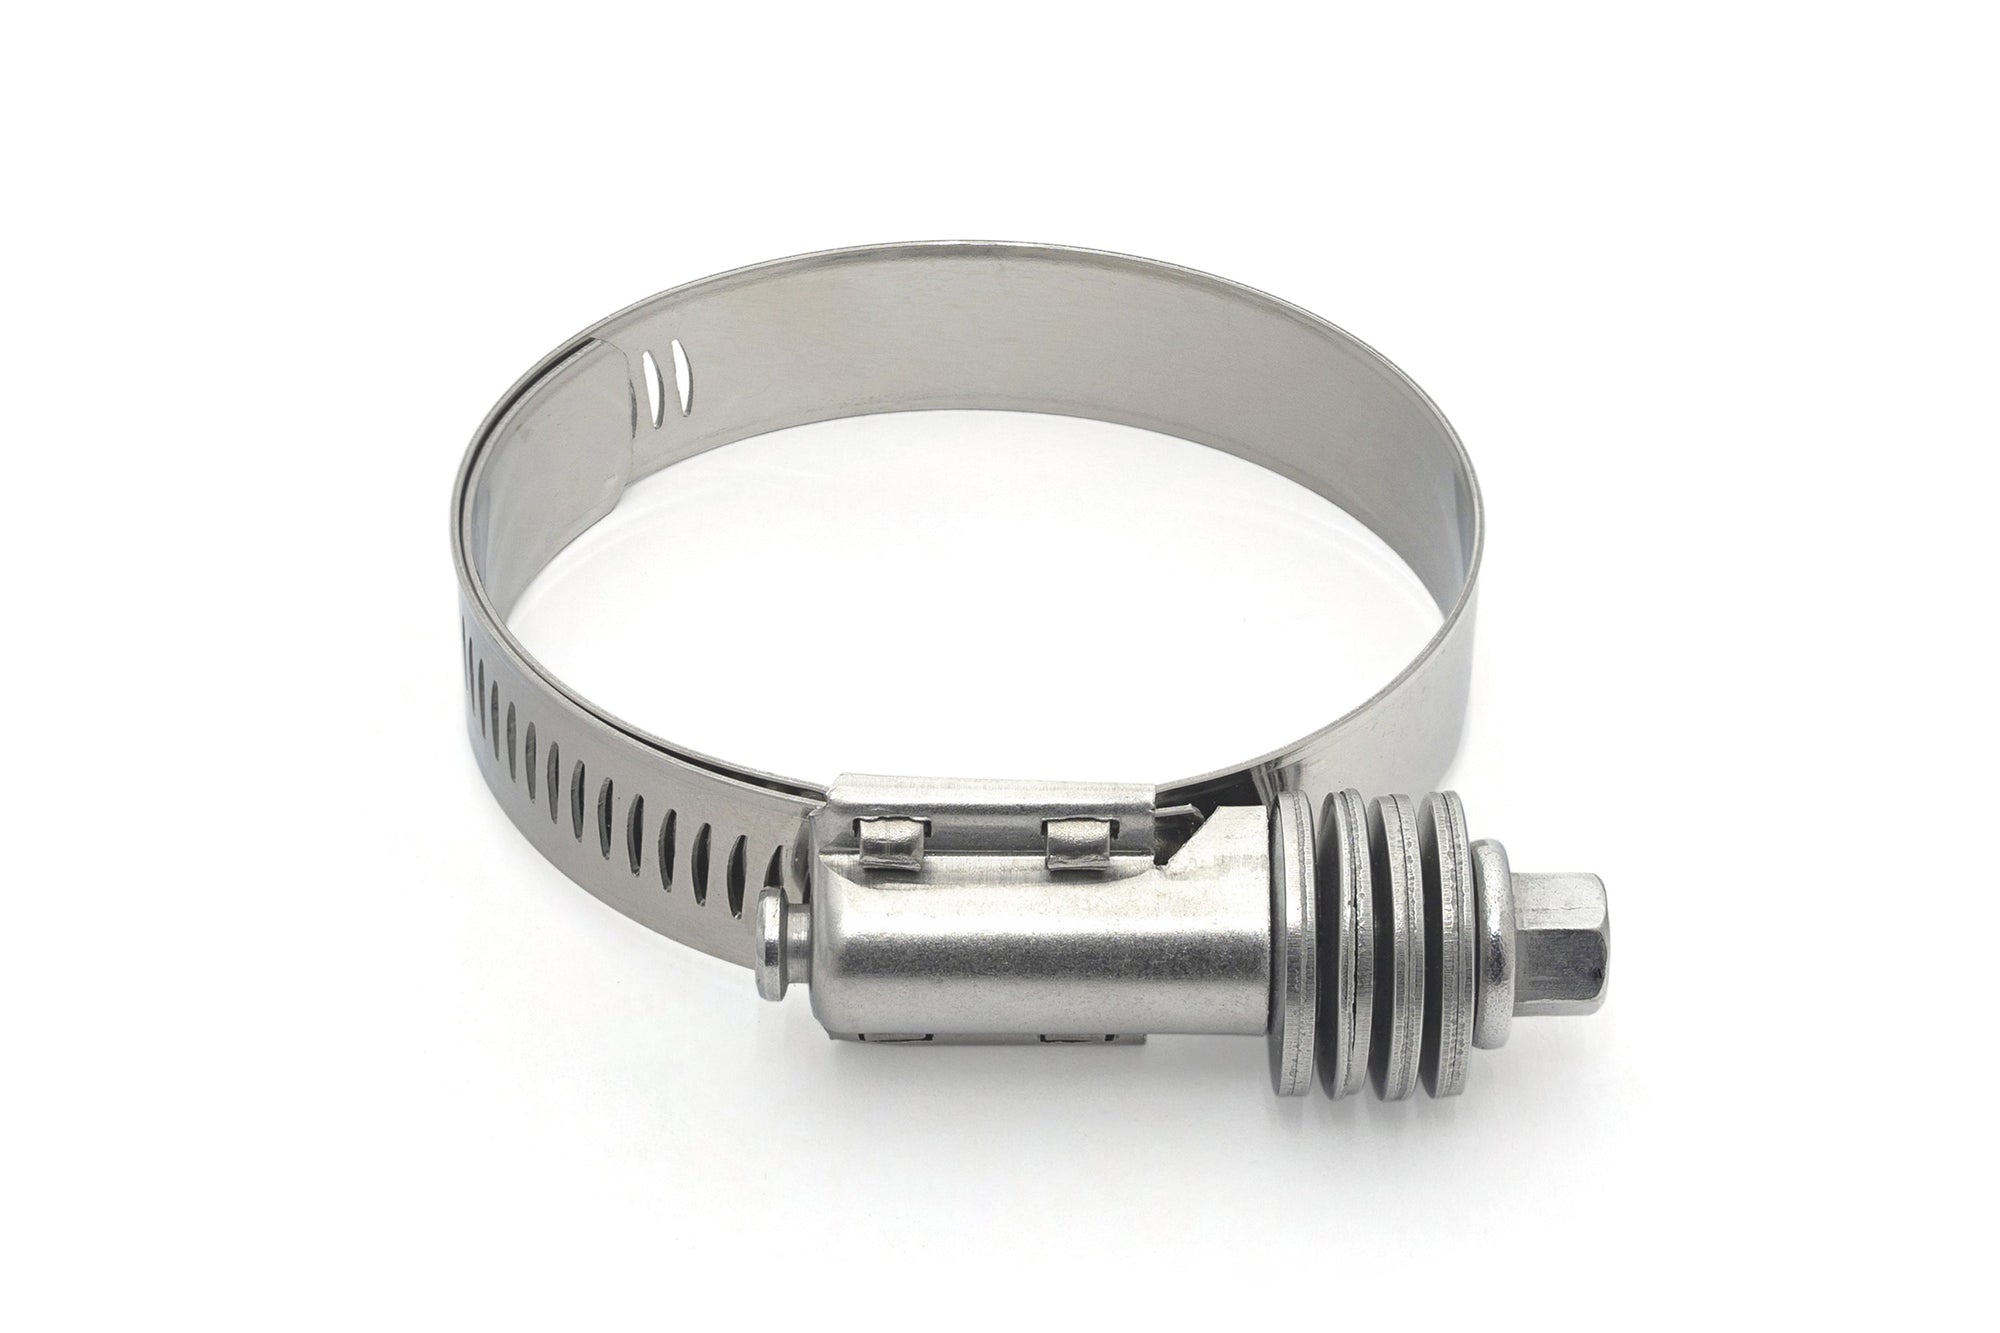 HPS Stainless Steel Heavy Duty Constant Tension Hose Clamp 5-1/4 - 6-1/8 inch 133mm - 156mm Size # 612